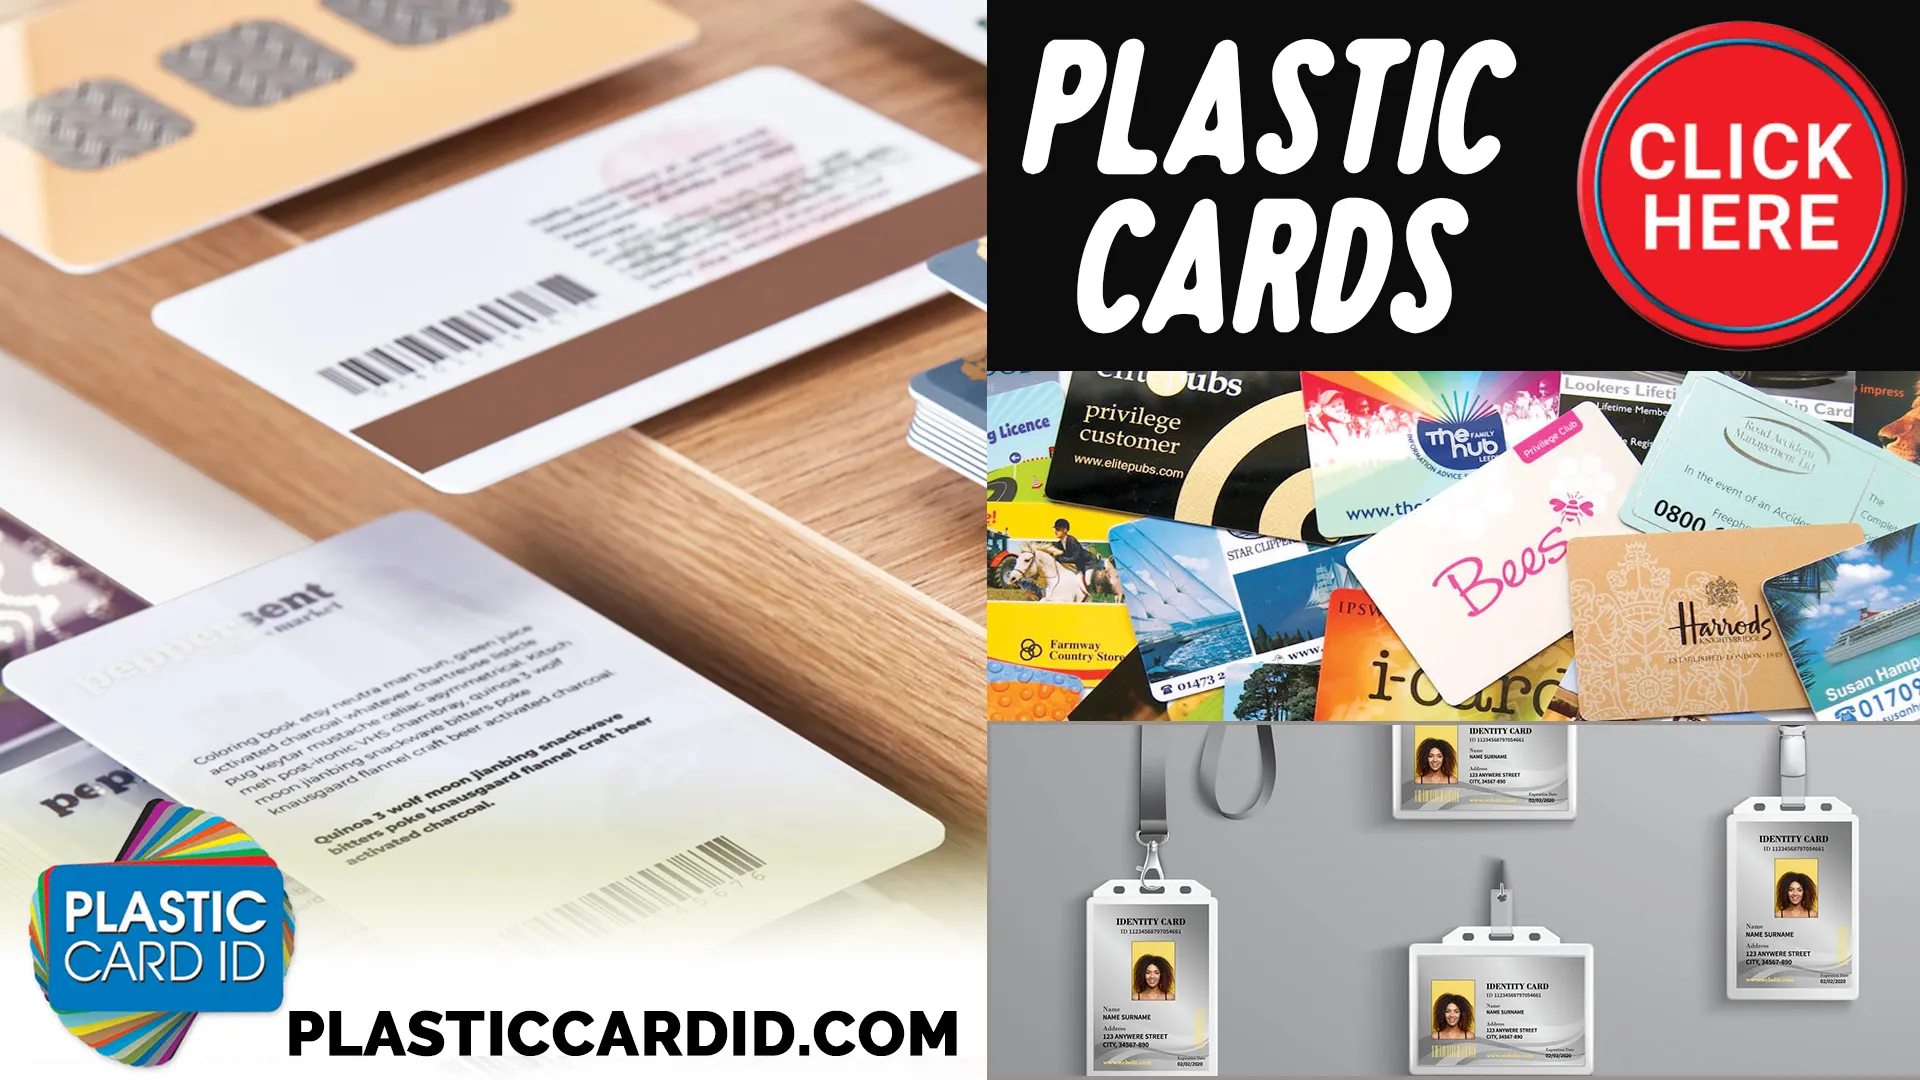 Plastic Card ID
's Commitment to Quality and Durability